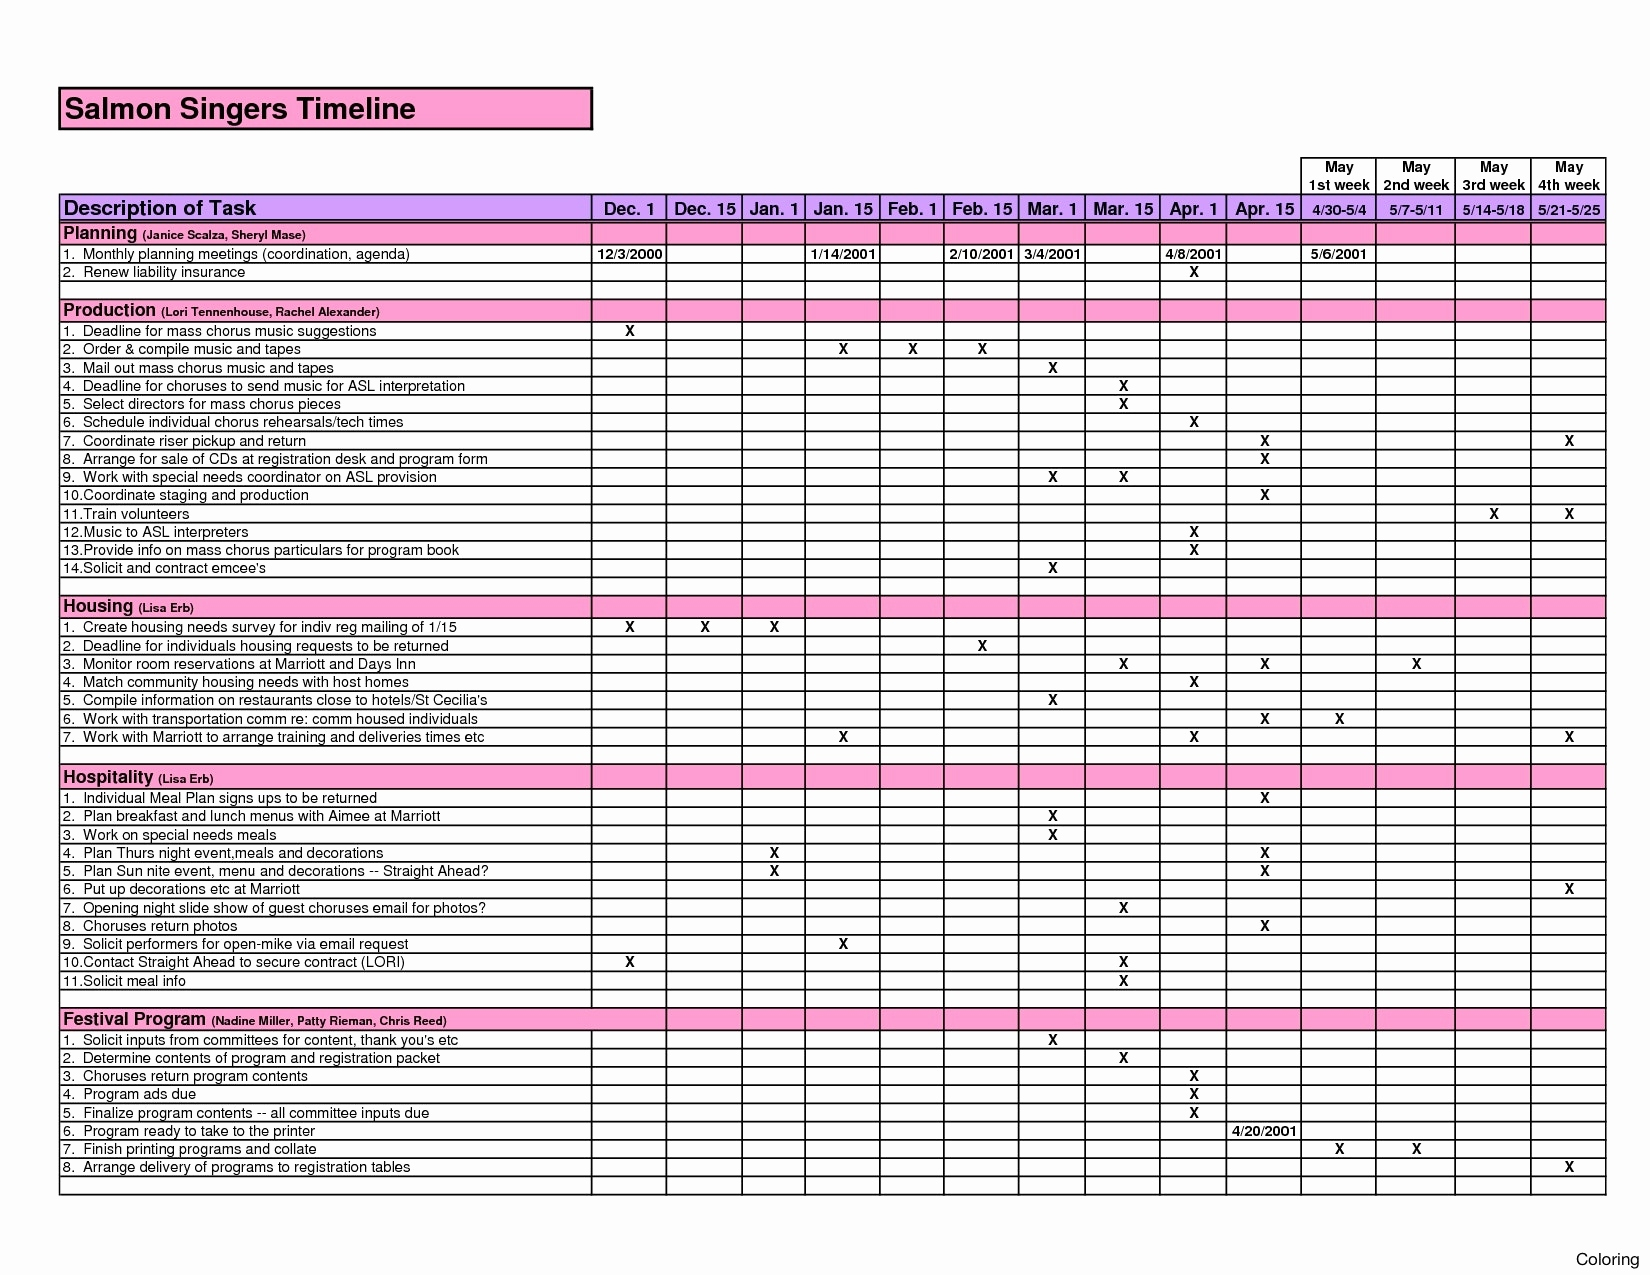 Contents Insurance Checklist Spreadsheet pertaining to Bill Checklist Template Printable Paying Lovely Monthly Blank